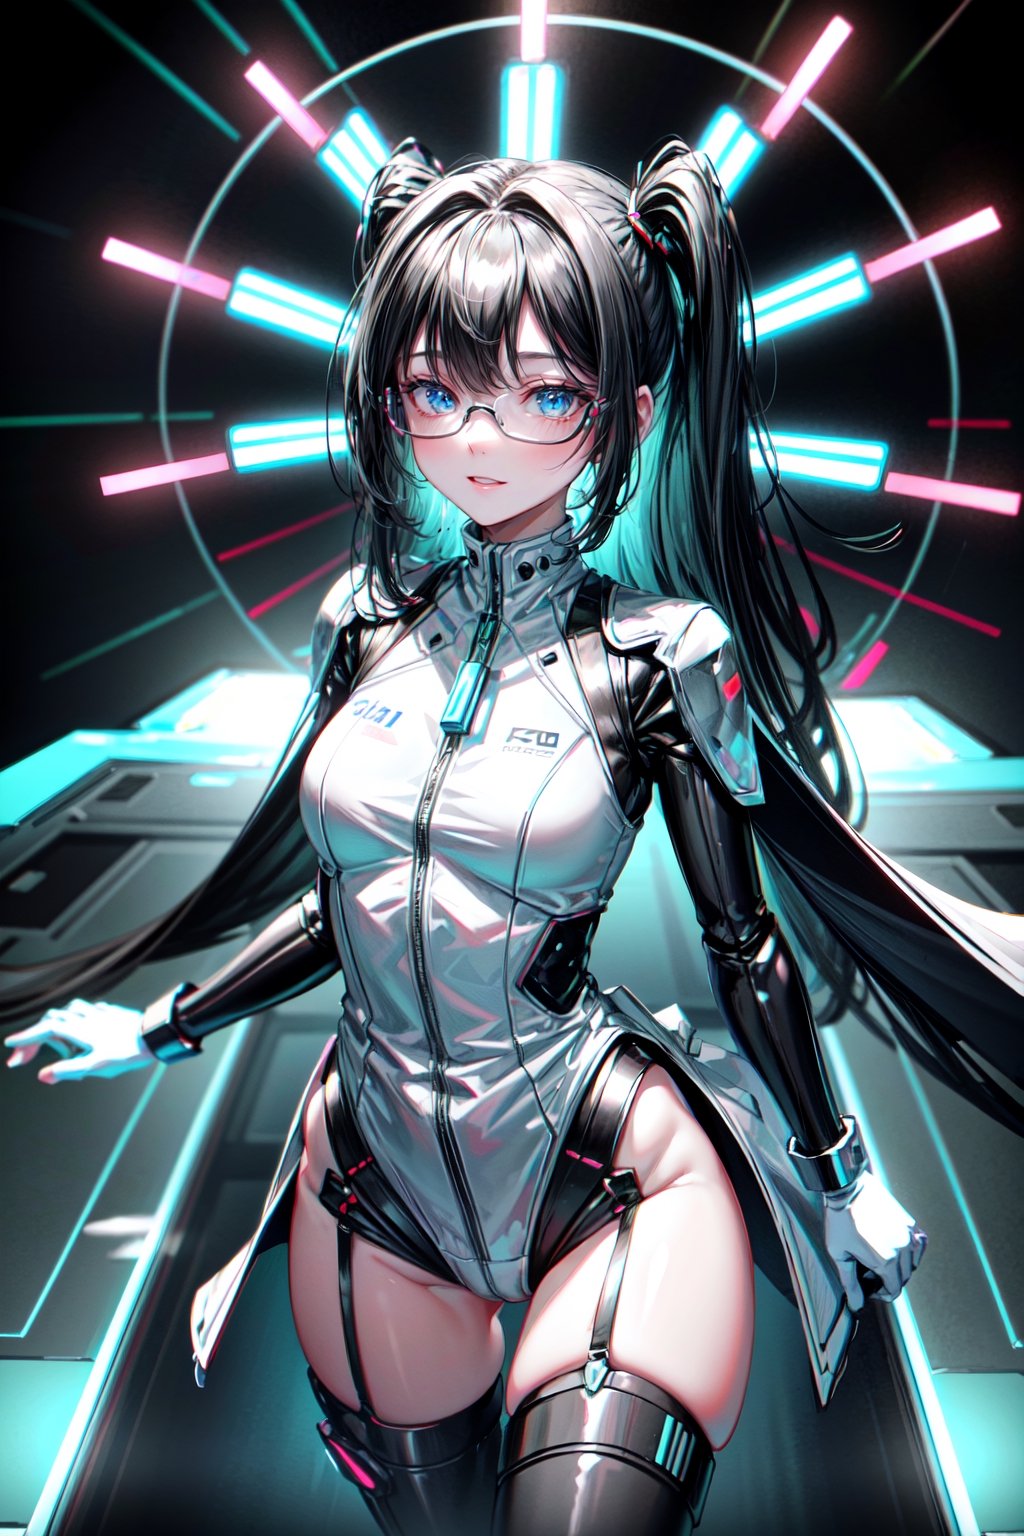 ((high resolution)), ((8K)), ((incredibly absurdres)), break. ((One android girl with happy smile)), break. ((black hair:1.5)), (full body:1.5)), ((looking at camera:1.5)), break. ((in the cyberstyle city)), ((slender boby)), ((intricate internal structure)), ((brighten parts:1.5)), break. ((robotic arms)), ((robotic legs)), ((robotic hands)), ((robotic joint:1.2)), break.  //Fashions 
Virtual Reality Diva, BREAK. Virtual Reality Bodysuit, Go for a sleek bodysuit with virtual reality-inspired patterns to create a futuristic and high-tech appearance, BREAK. Futuristic Platform Sneakers, Complete the look with platform sneakers featuring holographic details, combining style with a touch of edginess, BREAK. Augmented Reality Glasses, Accentuate the outfit with augmented reality glasses, elevating the cyber idol aesthetic, Digital Microphone Prop, Carry a digital microphone prop with LED lights to enhance the virtual performance vibe, break.Cinematic angle, ultra fine quality, masterpiece, best quality, incredibly absurdres, fhighly detailed, sharp focus, (photon mapping, radiosity, physically-based rendering, automatic white balance), masterpiece, best quality, ((Mecha body)), furure_urban, incredibly absurdres,Mecha body